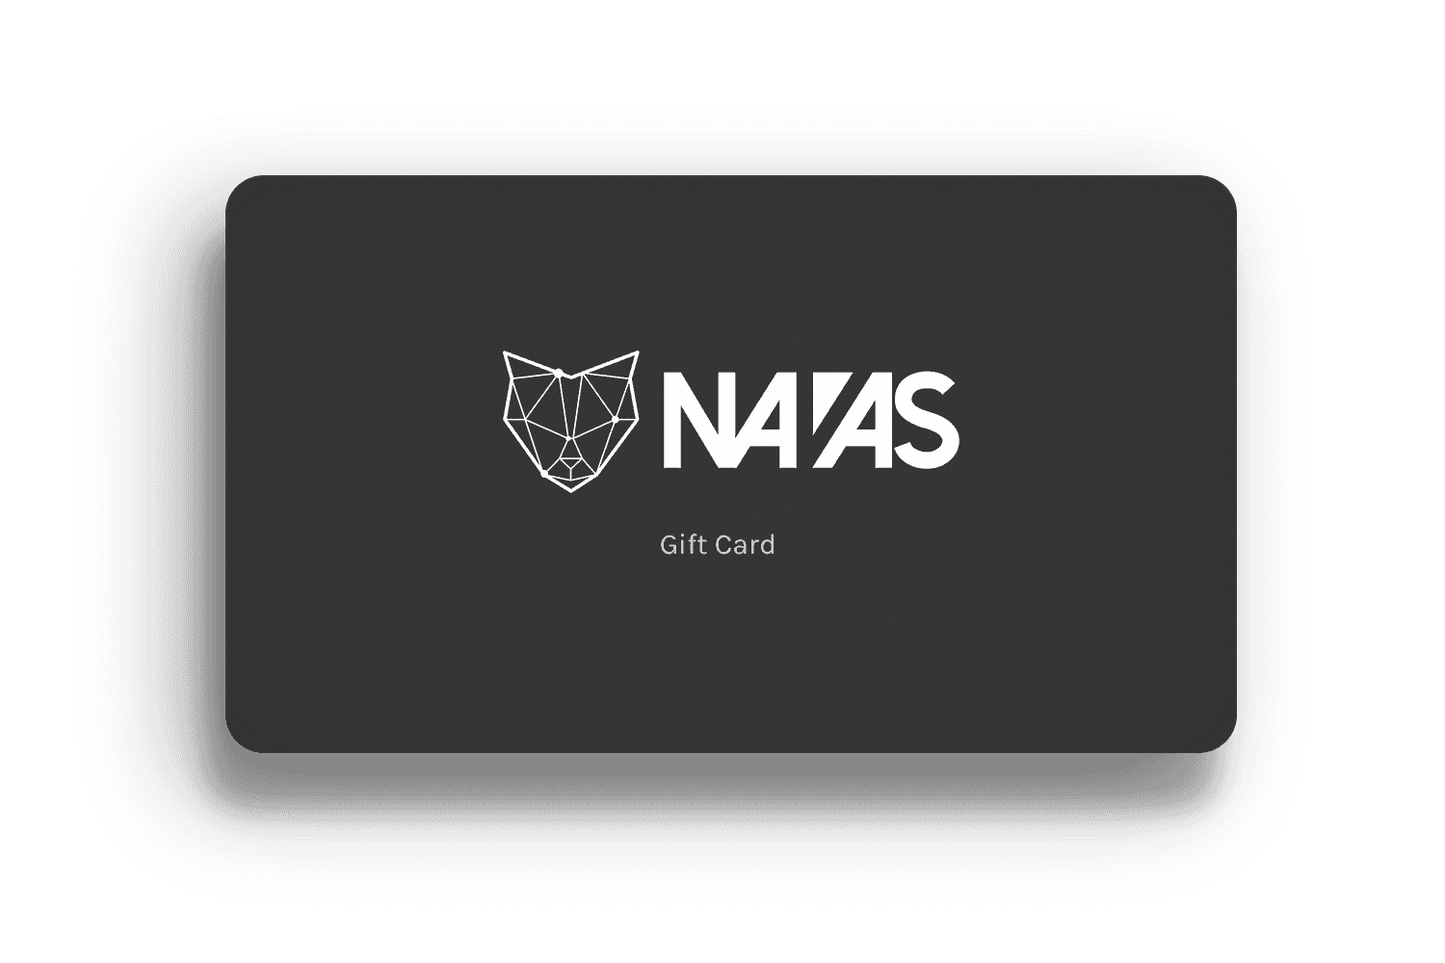 The Navas Lab Apparel gift card for tall men and especially tall boyfriends.